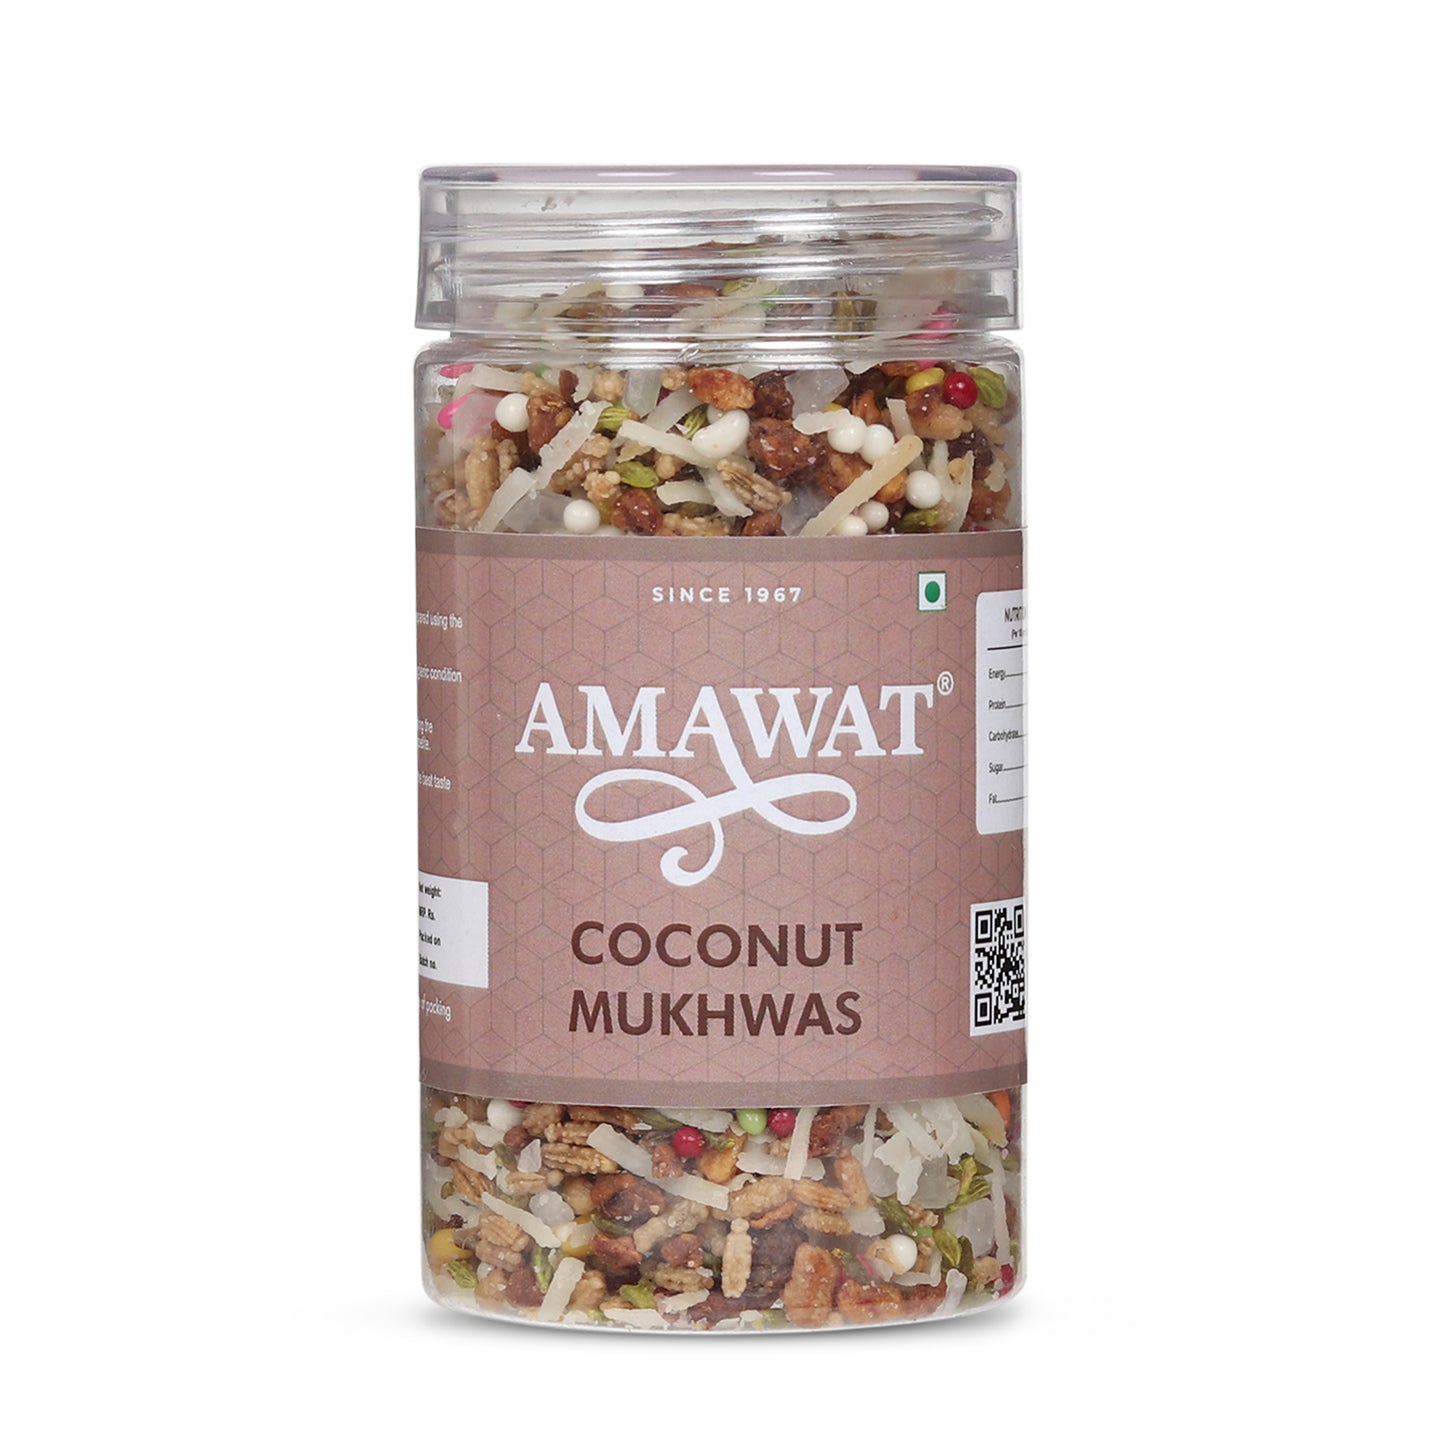 Shop coconut mukhwas from amawat